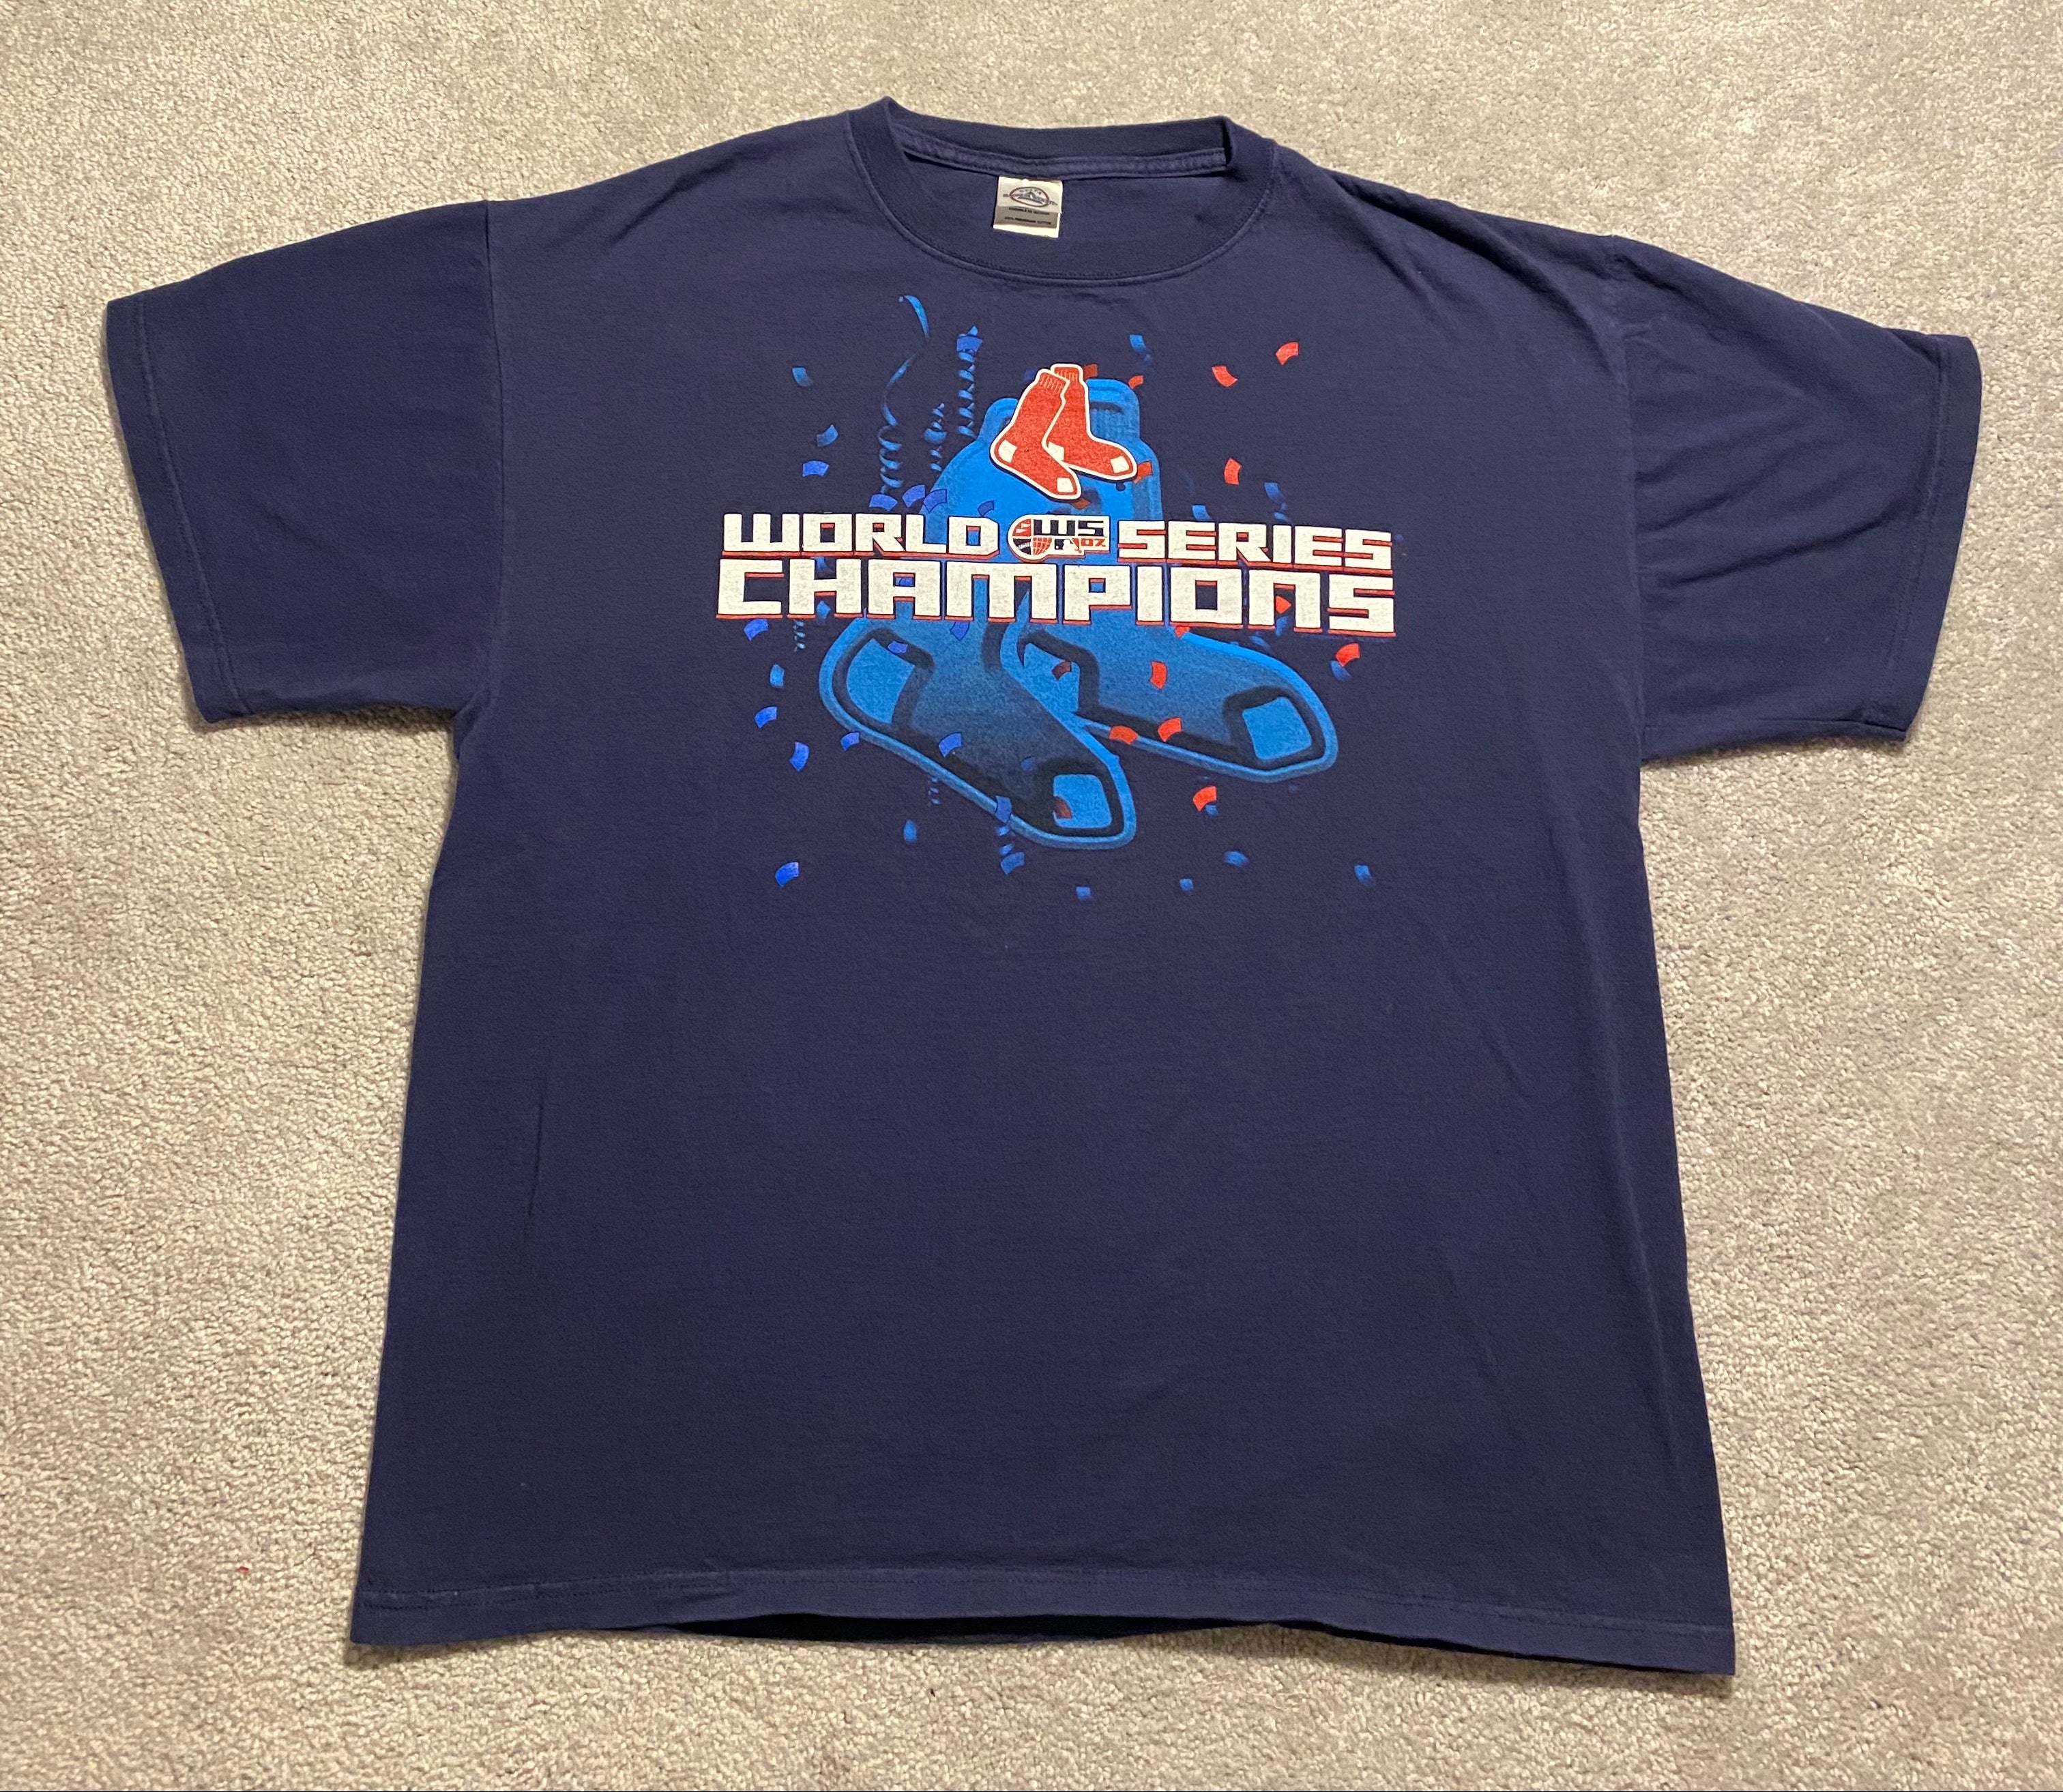 VTG 2013 Boston Red Sox World Series Champs Roster Signatures T-shirt Large